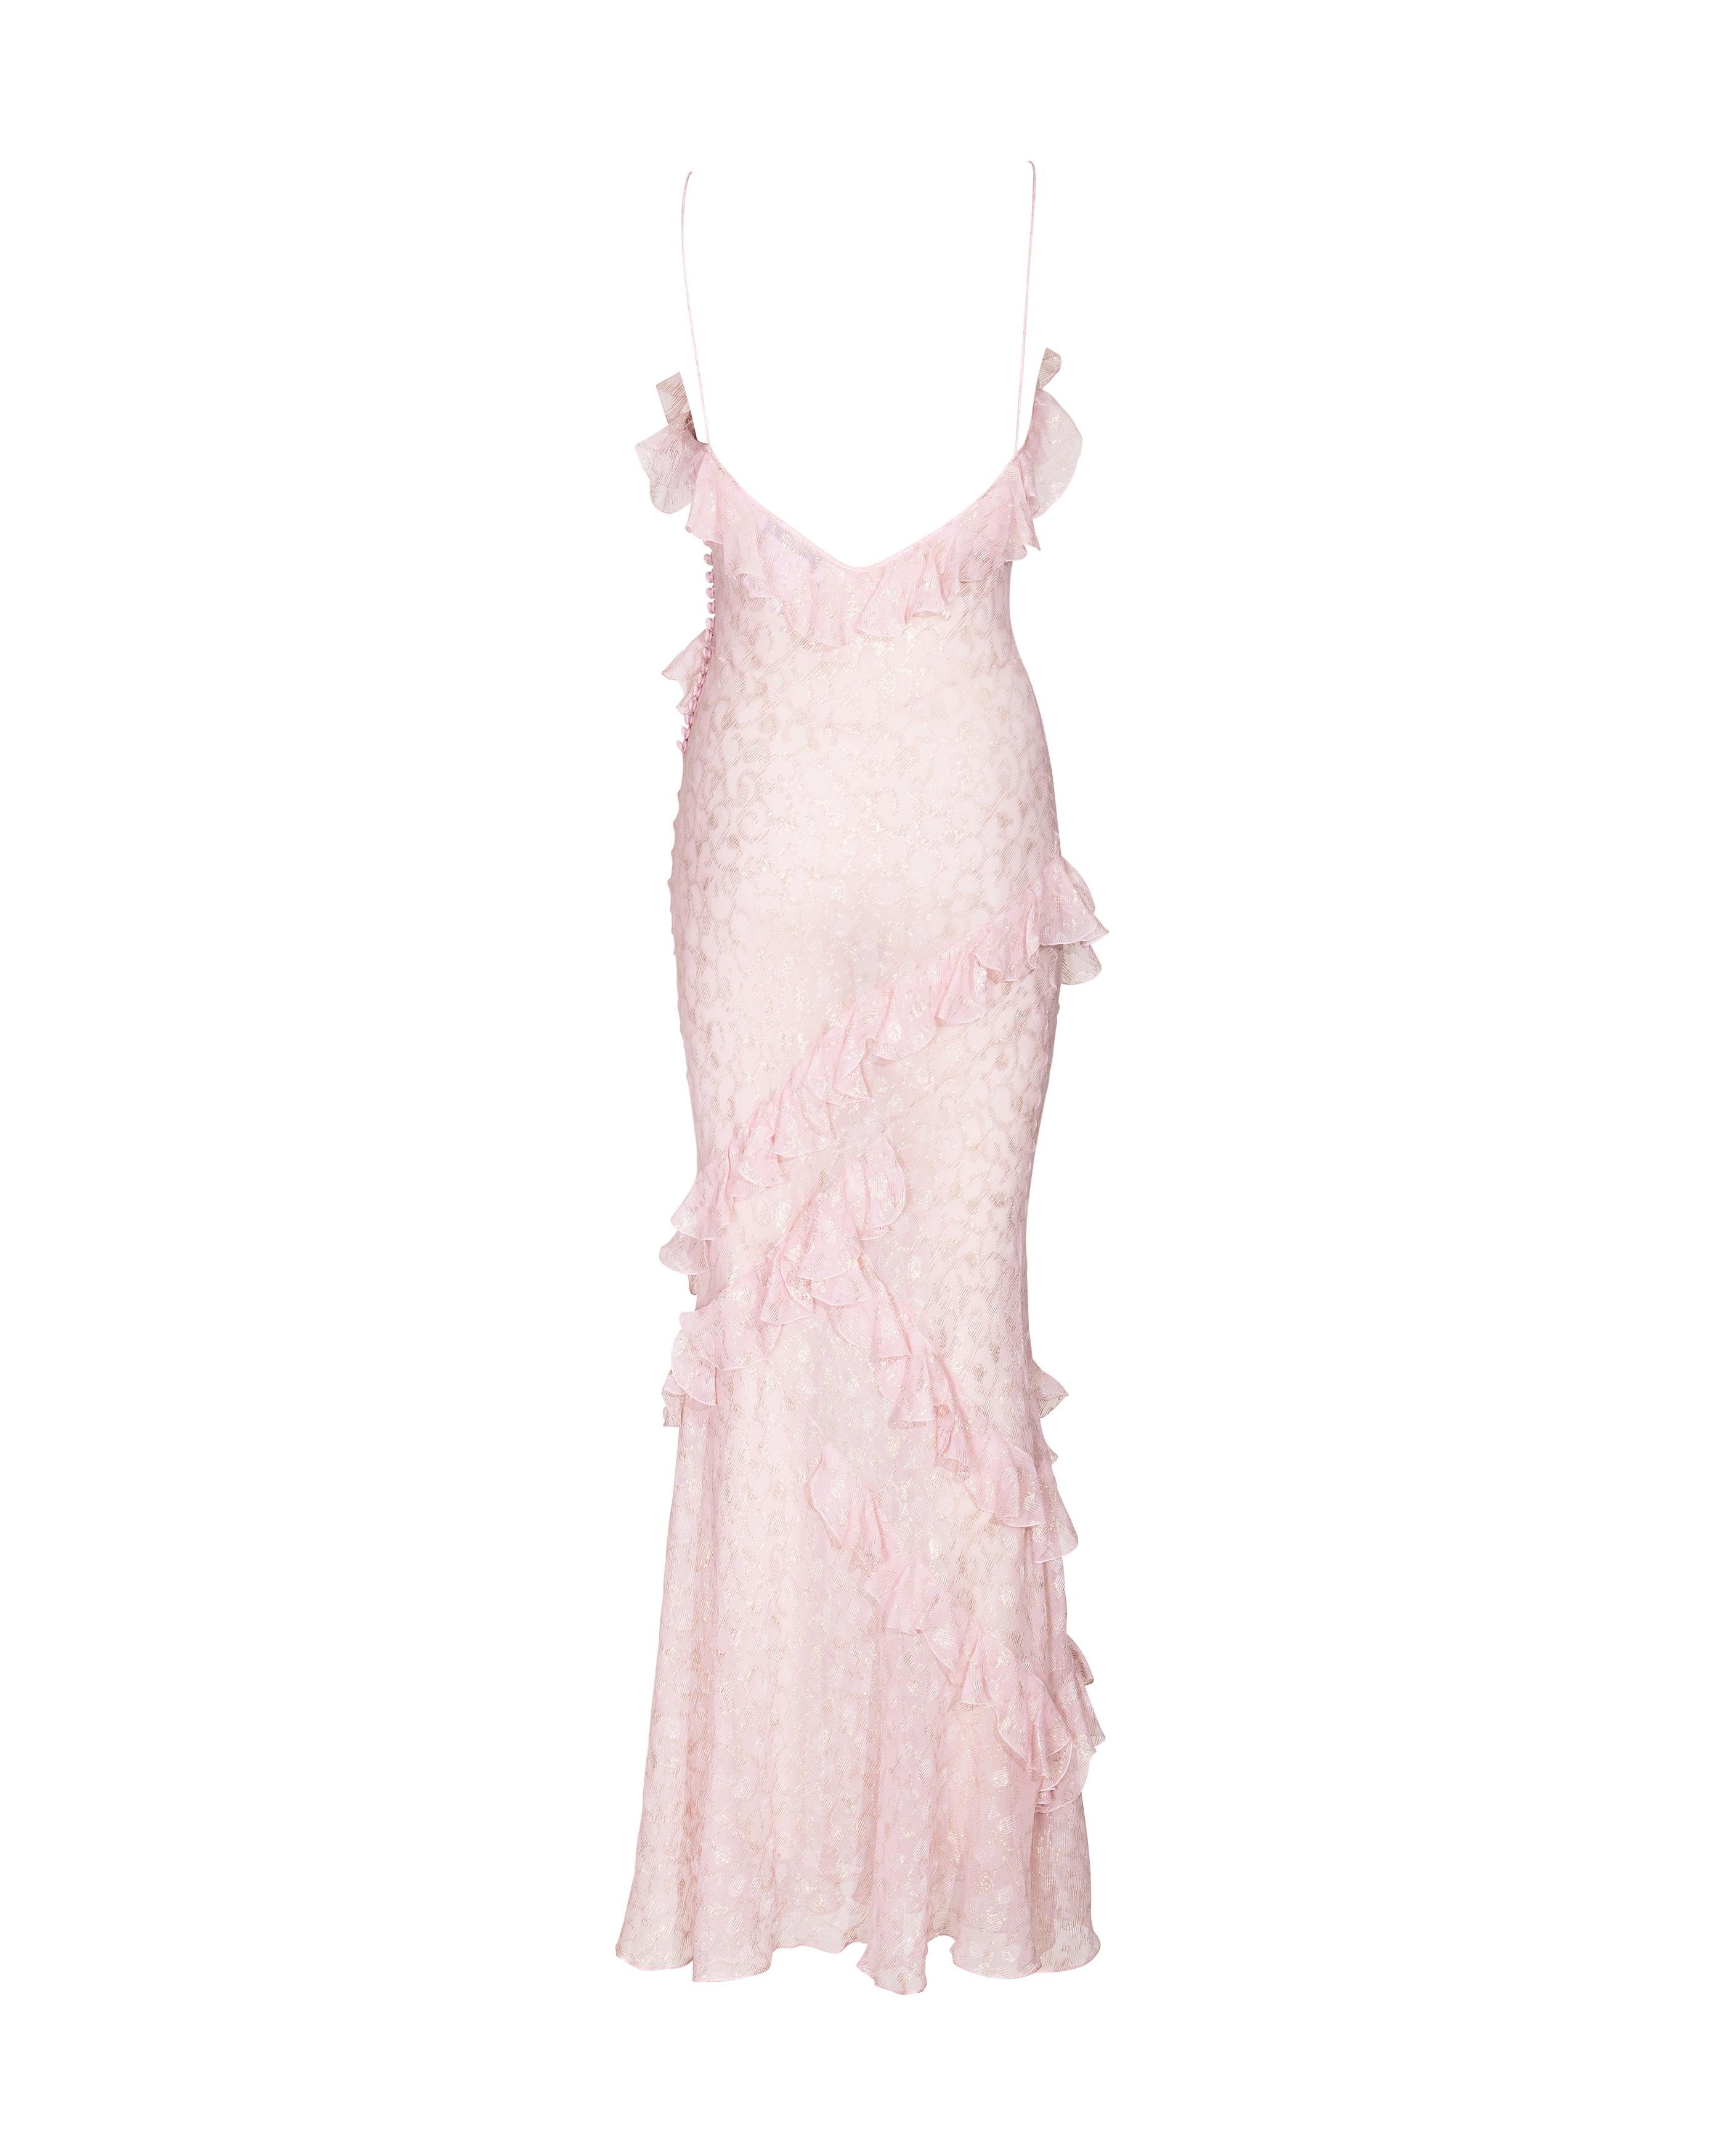 S/S 2004 Christian Dior by John Galliano Sheer Pink and Gold Ruffle Gown 1